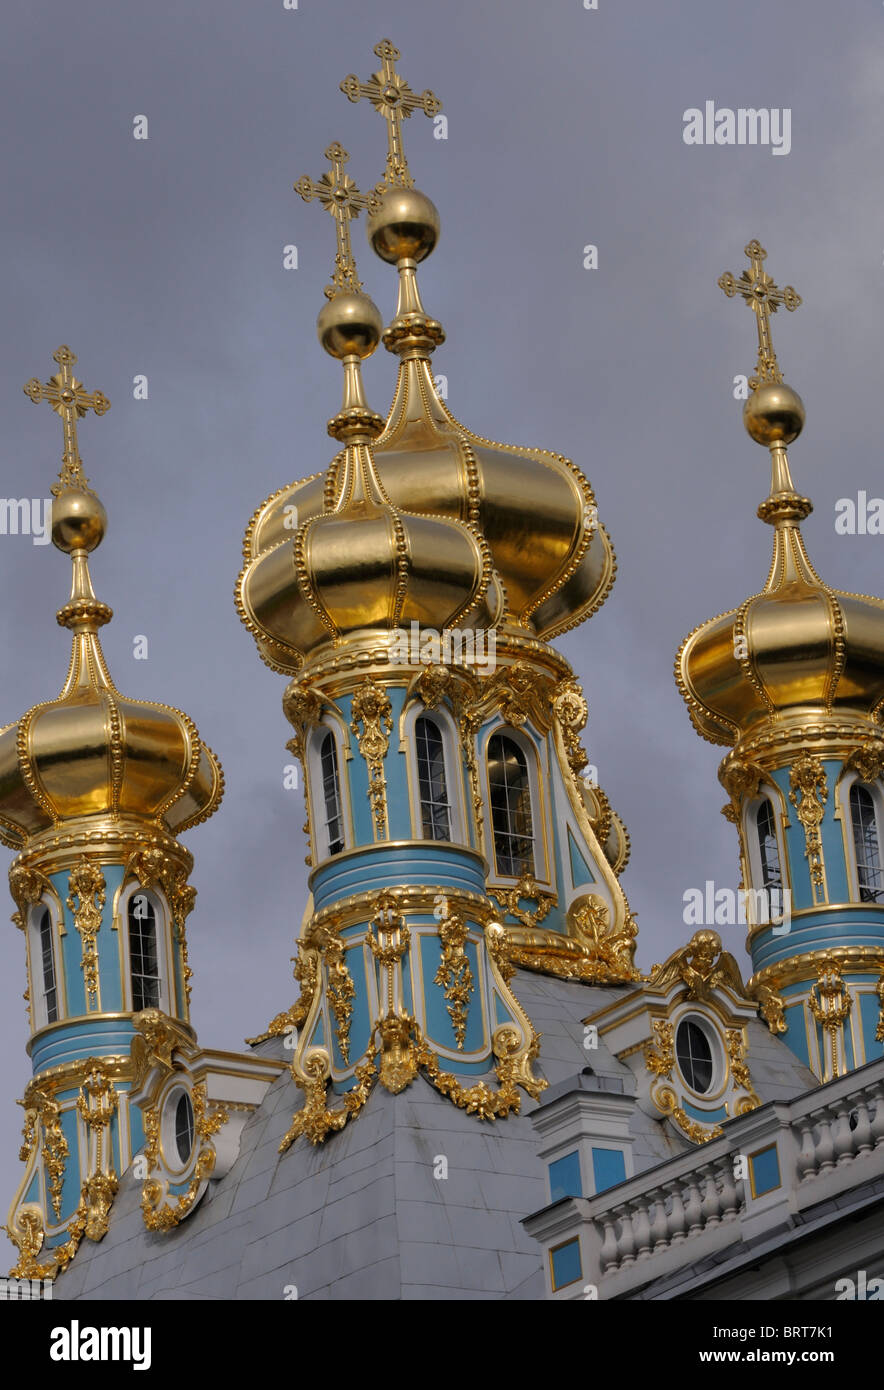 Roof of the Palace Church with golden domes and crosses at the Catherine Palace Museum, Tzarskoje Selo Palace at Pushkin. Stock Photo